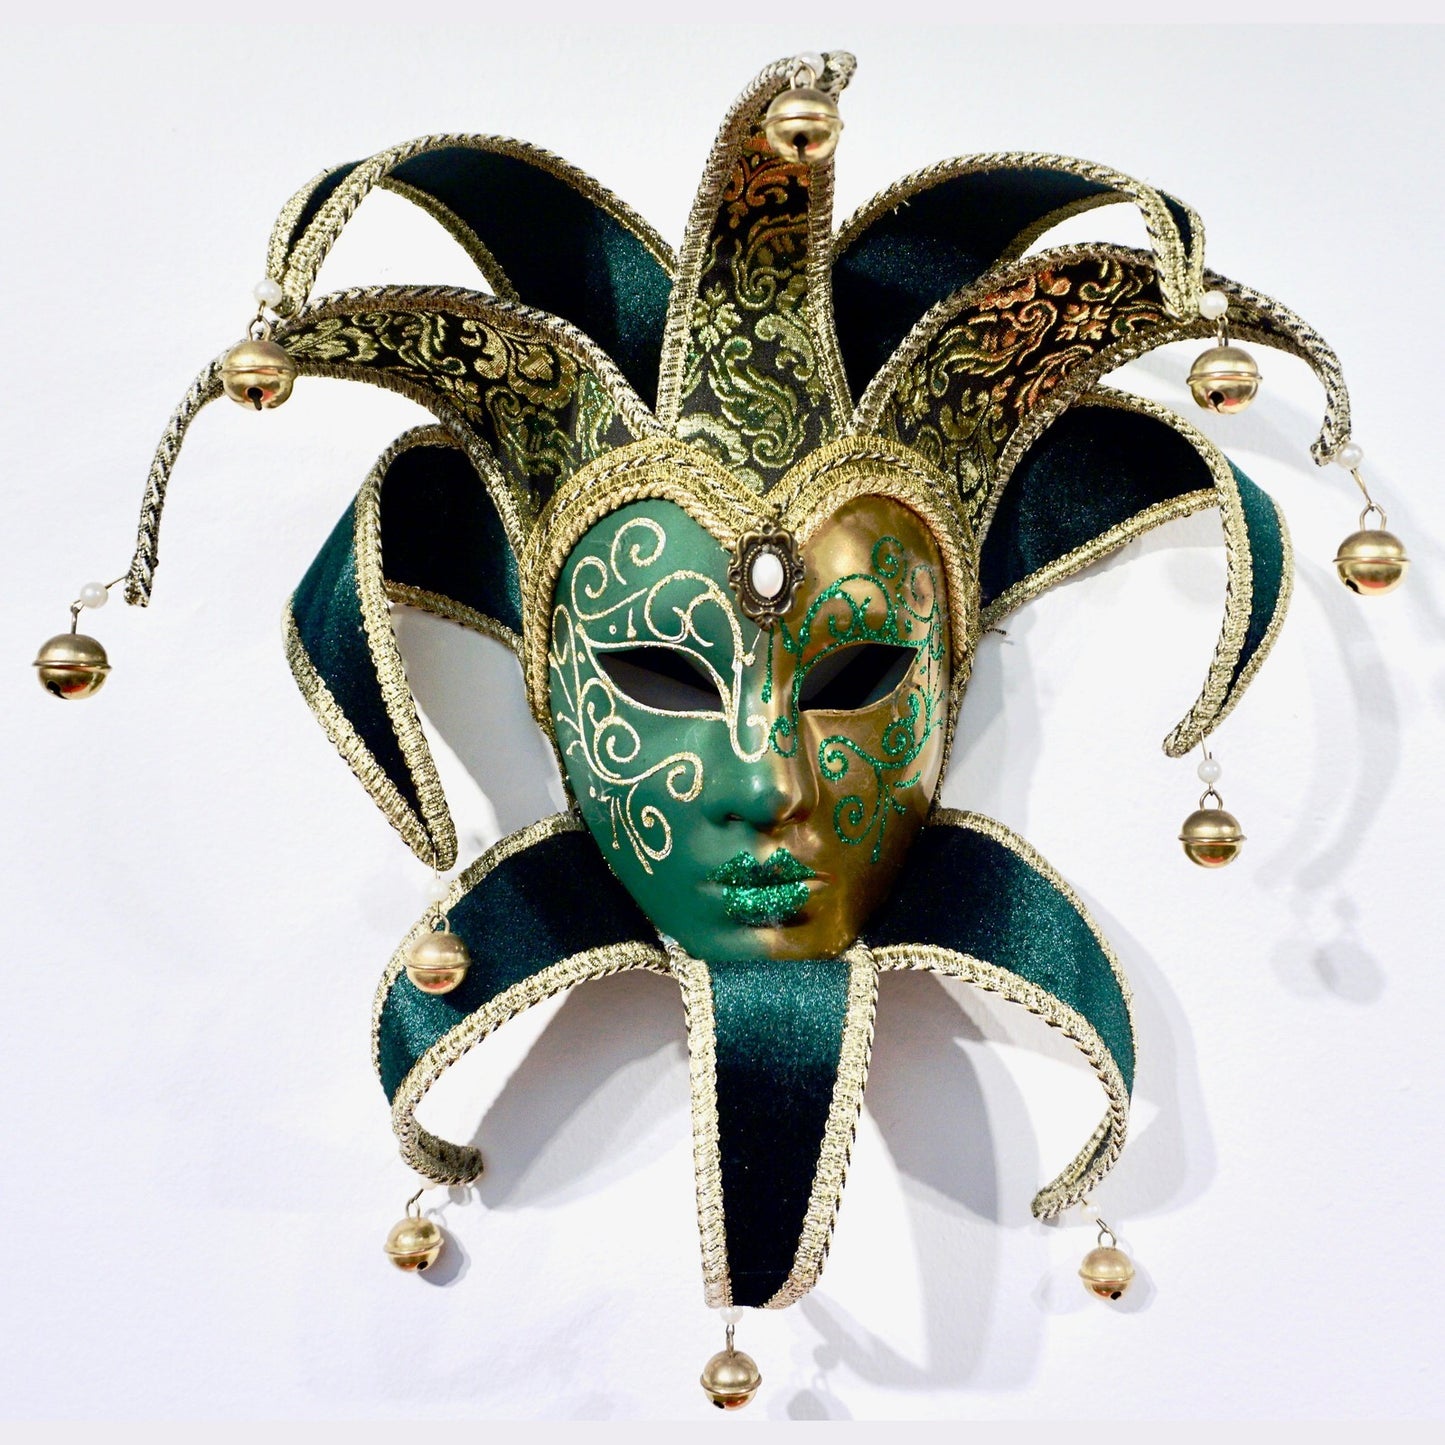 Venetian Green or Cobalt Blue and Gold Modern Mask with Jester Collar and Bells - Cosulich Interiors & Antiques